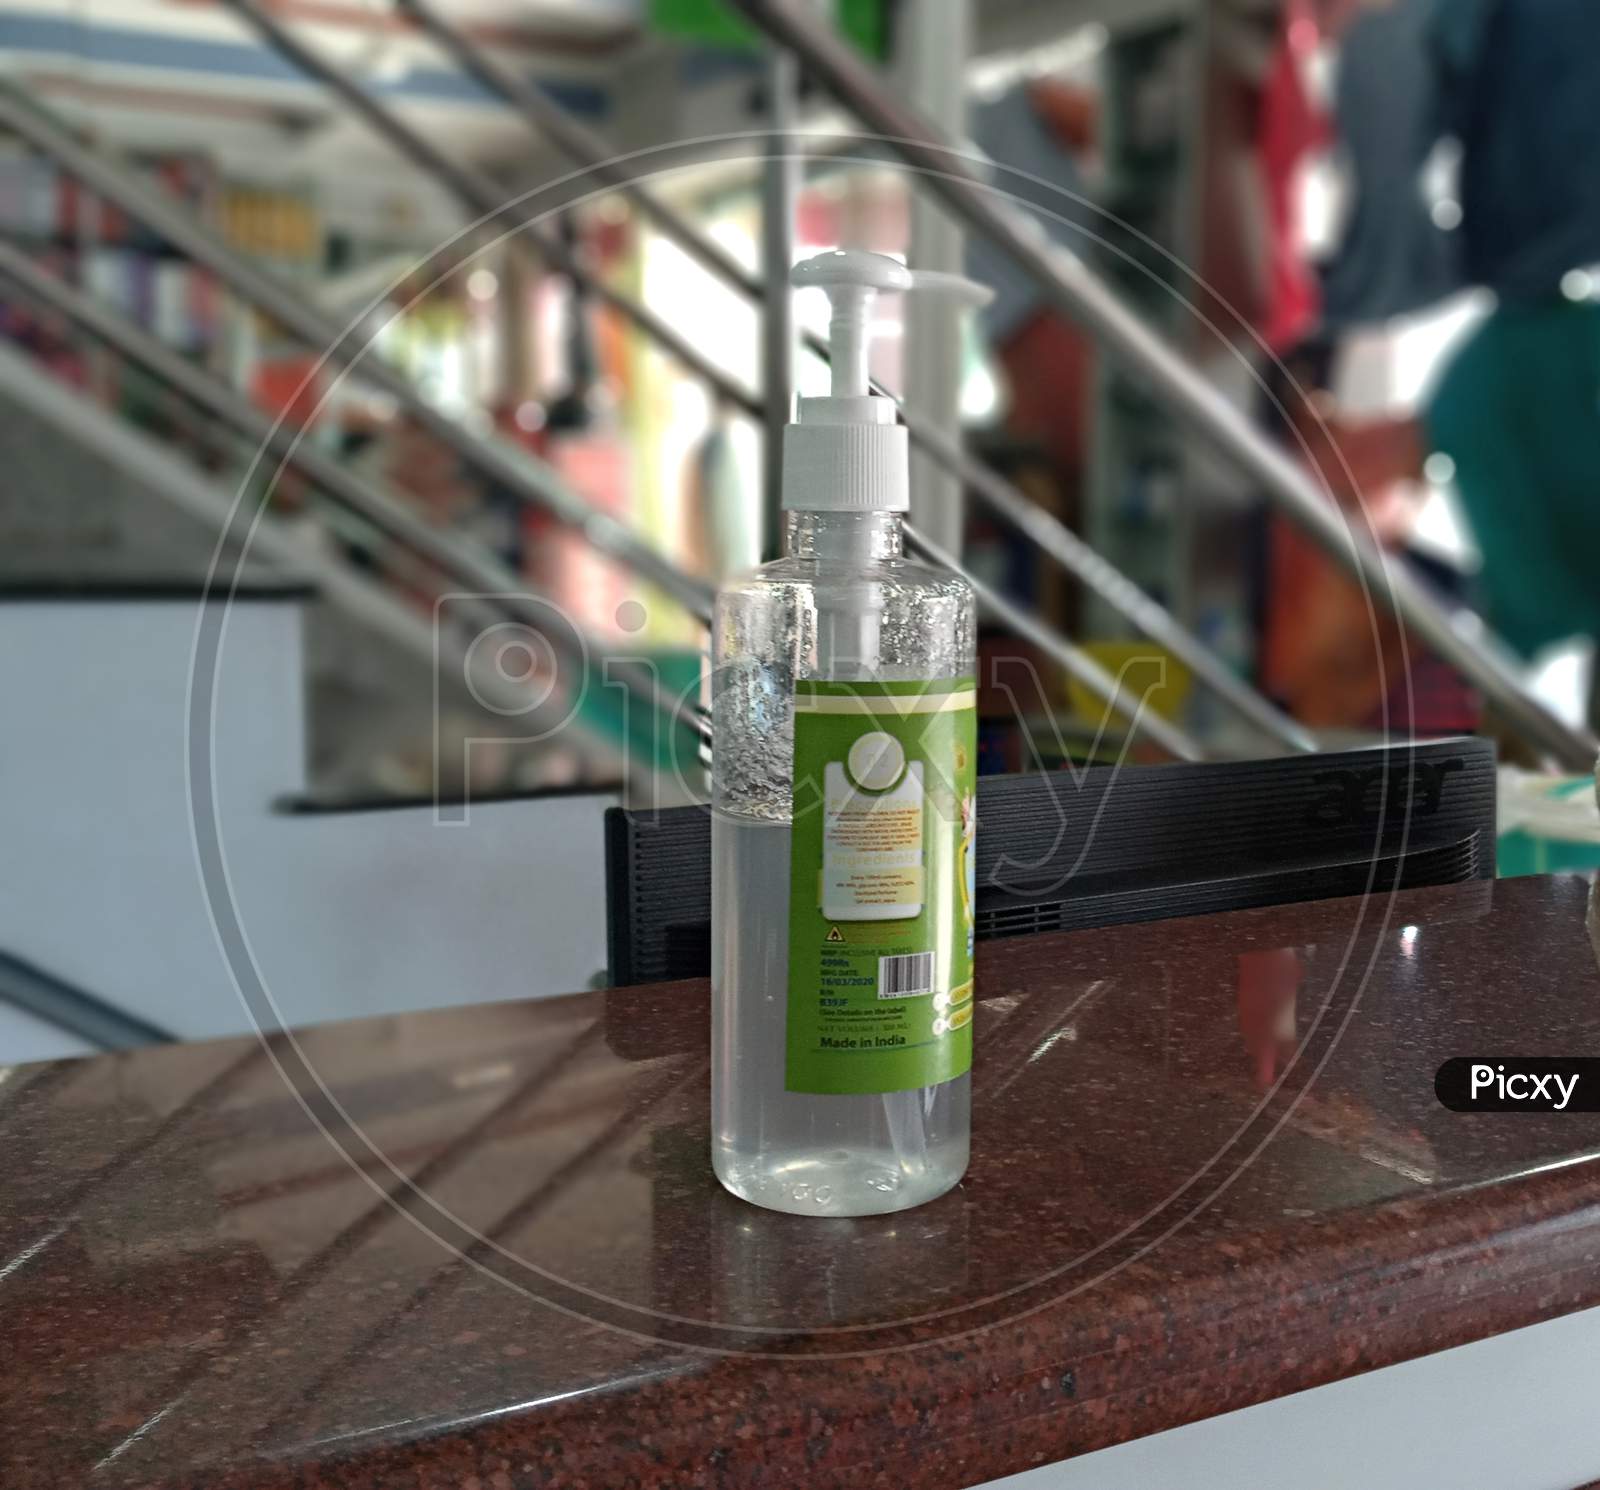 Hand sanitizer kept on top of shop counter for customers to sanitize their hands